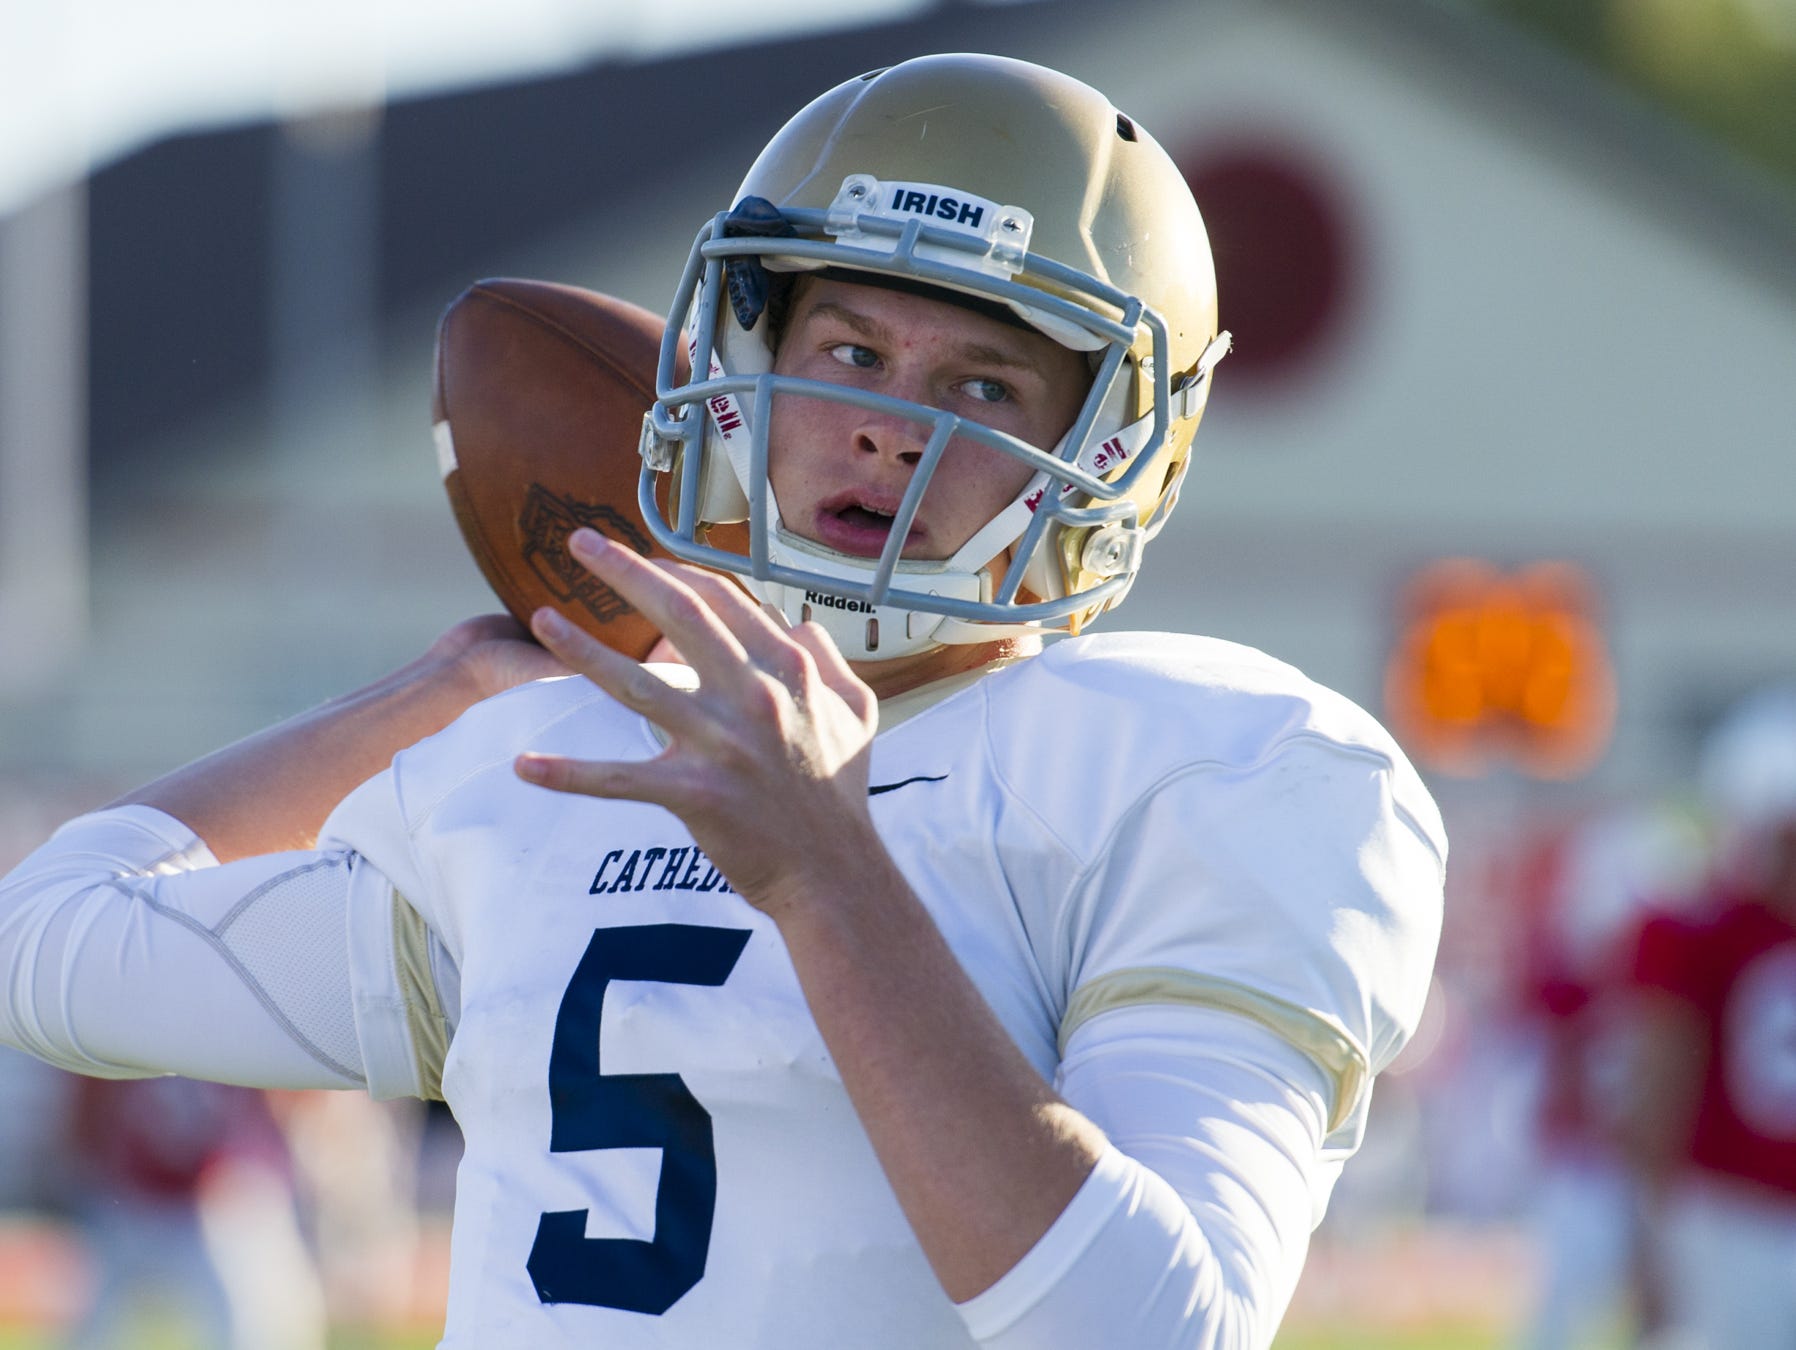 Cathedral QB Max Bortenschlager will play in the Big Ten at Maryland.